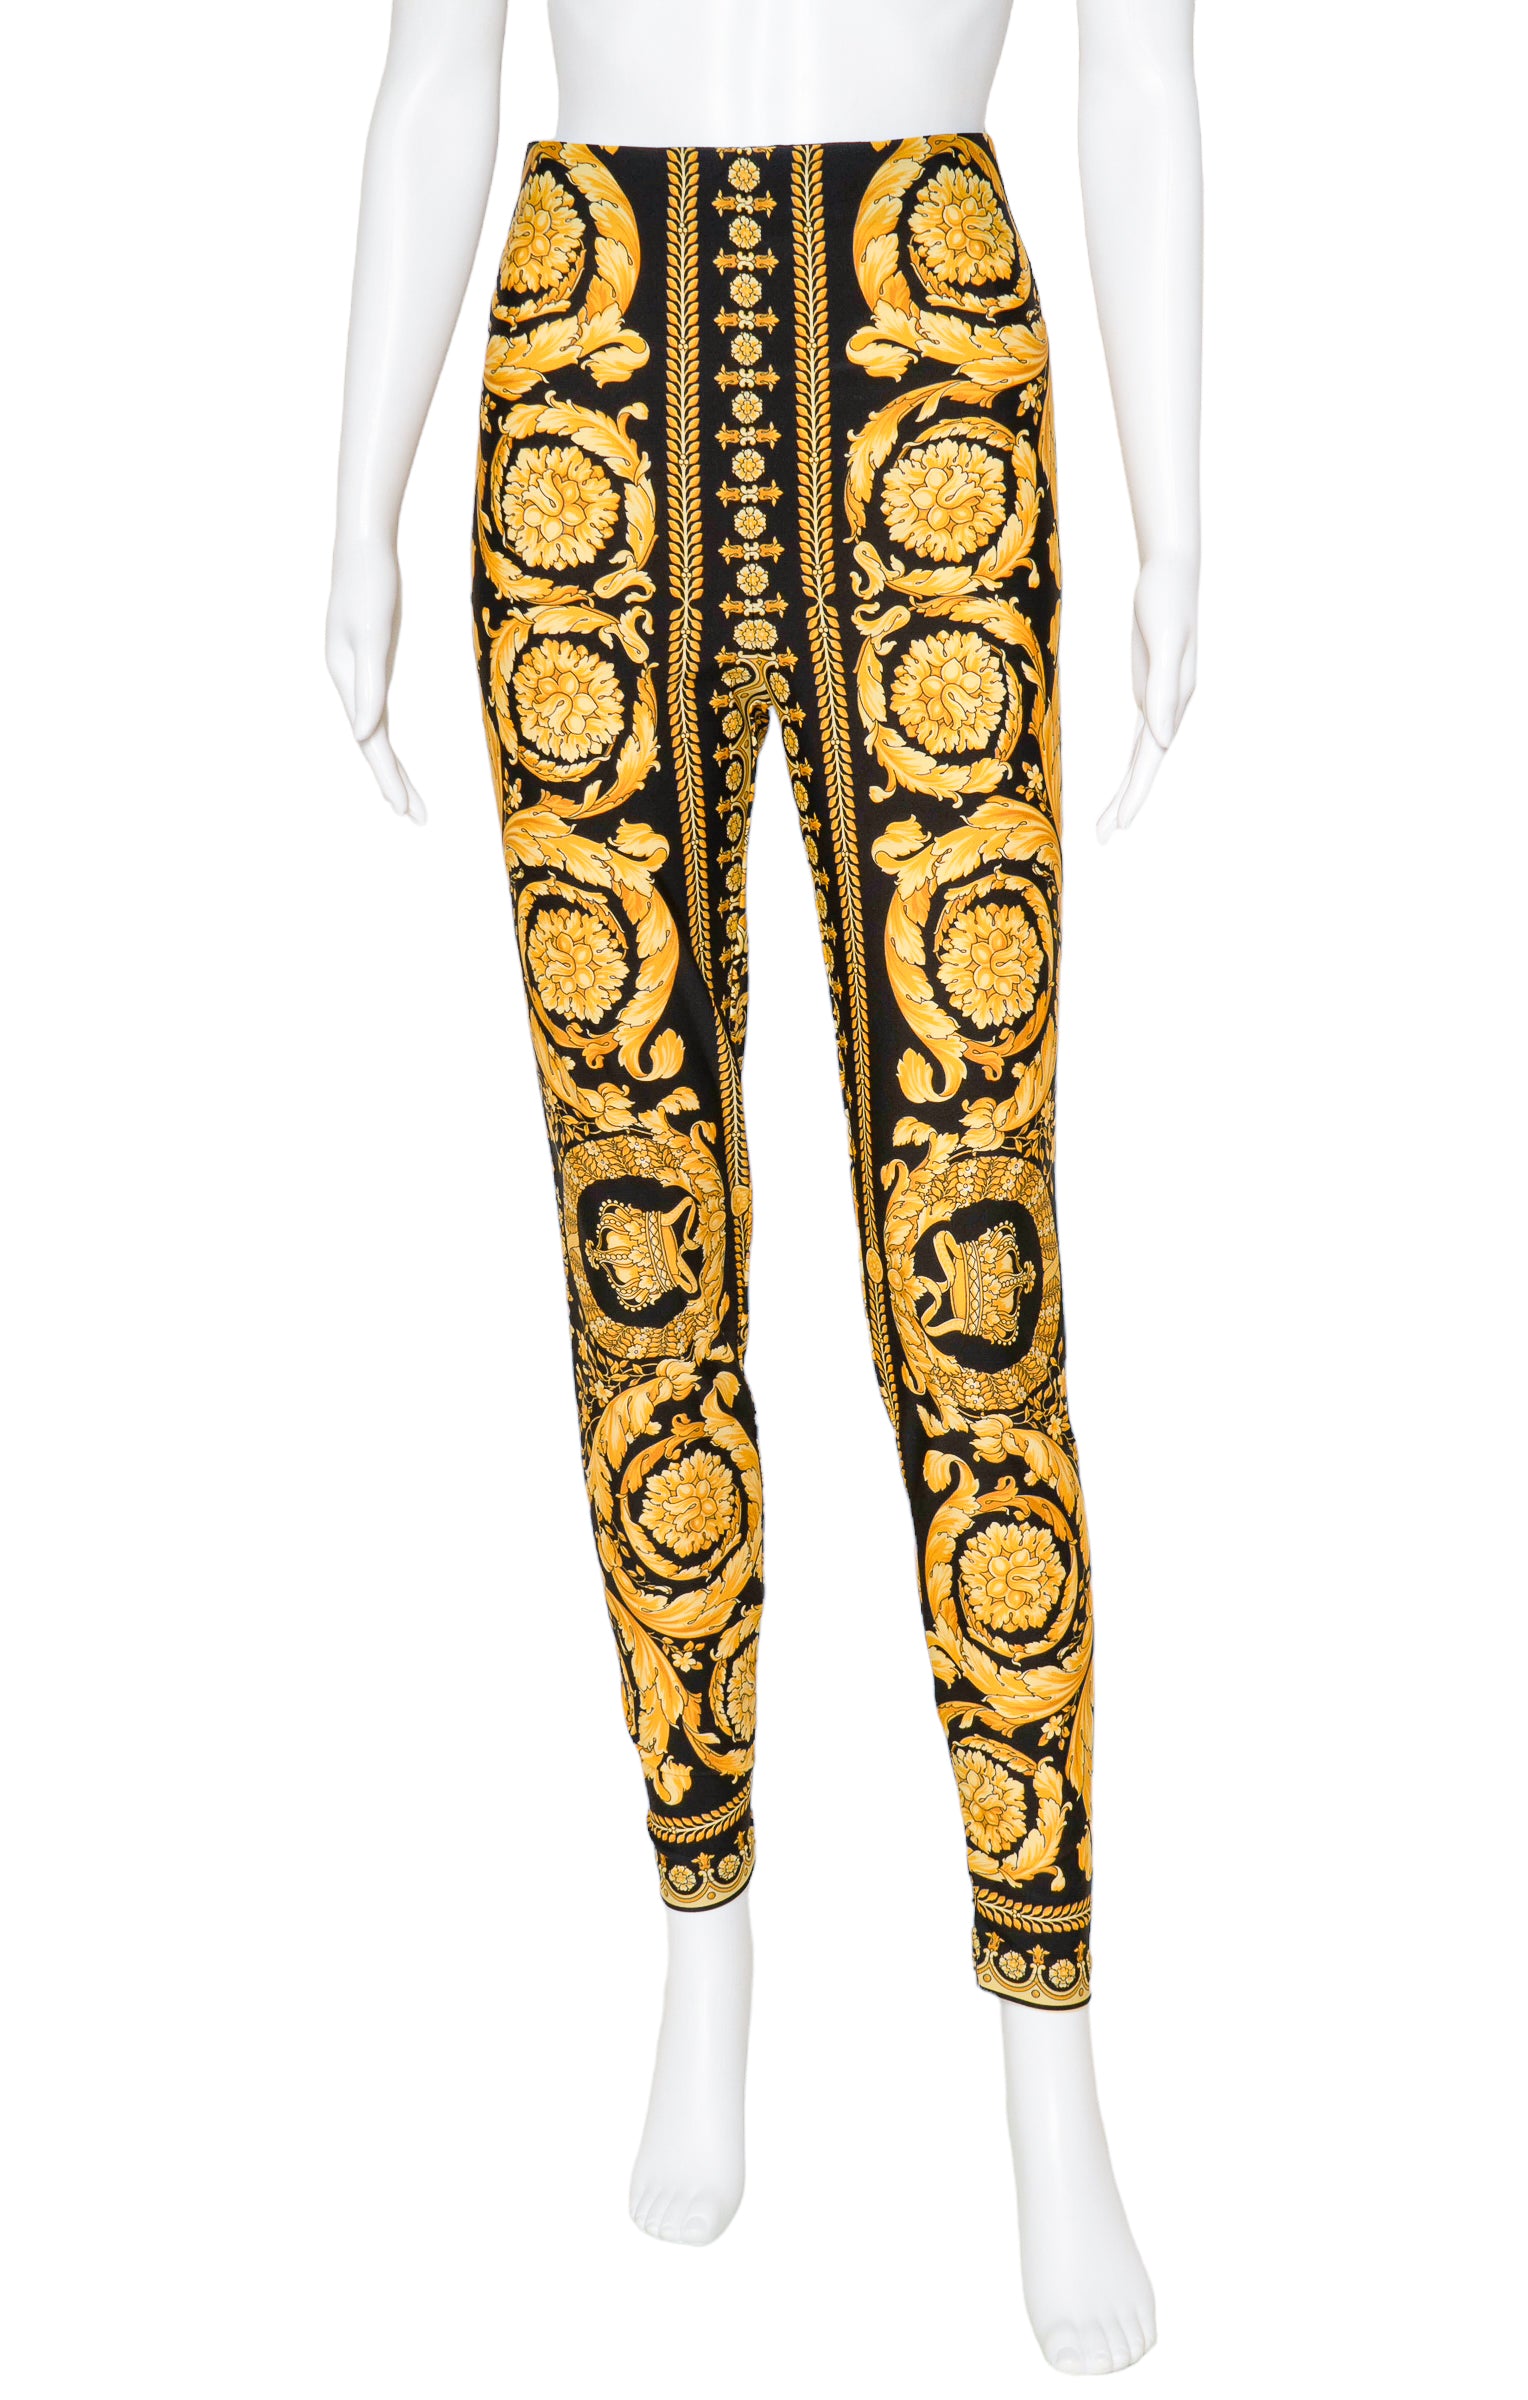 VERSACE (RARE) Pants Size: IT 44 / Comparable to US 6-8